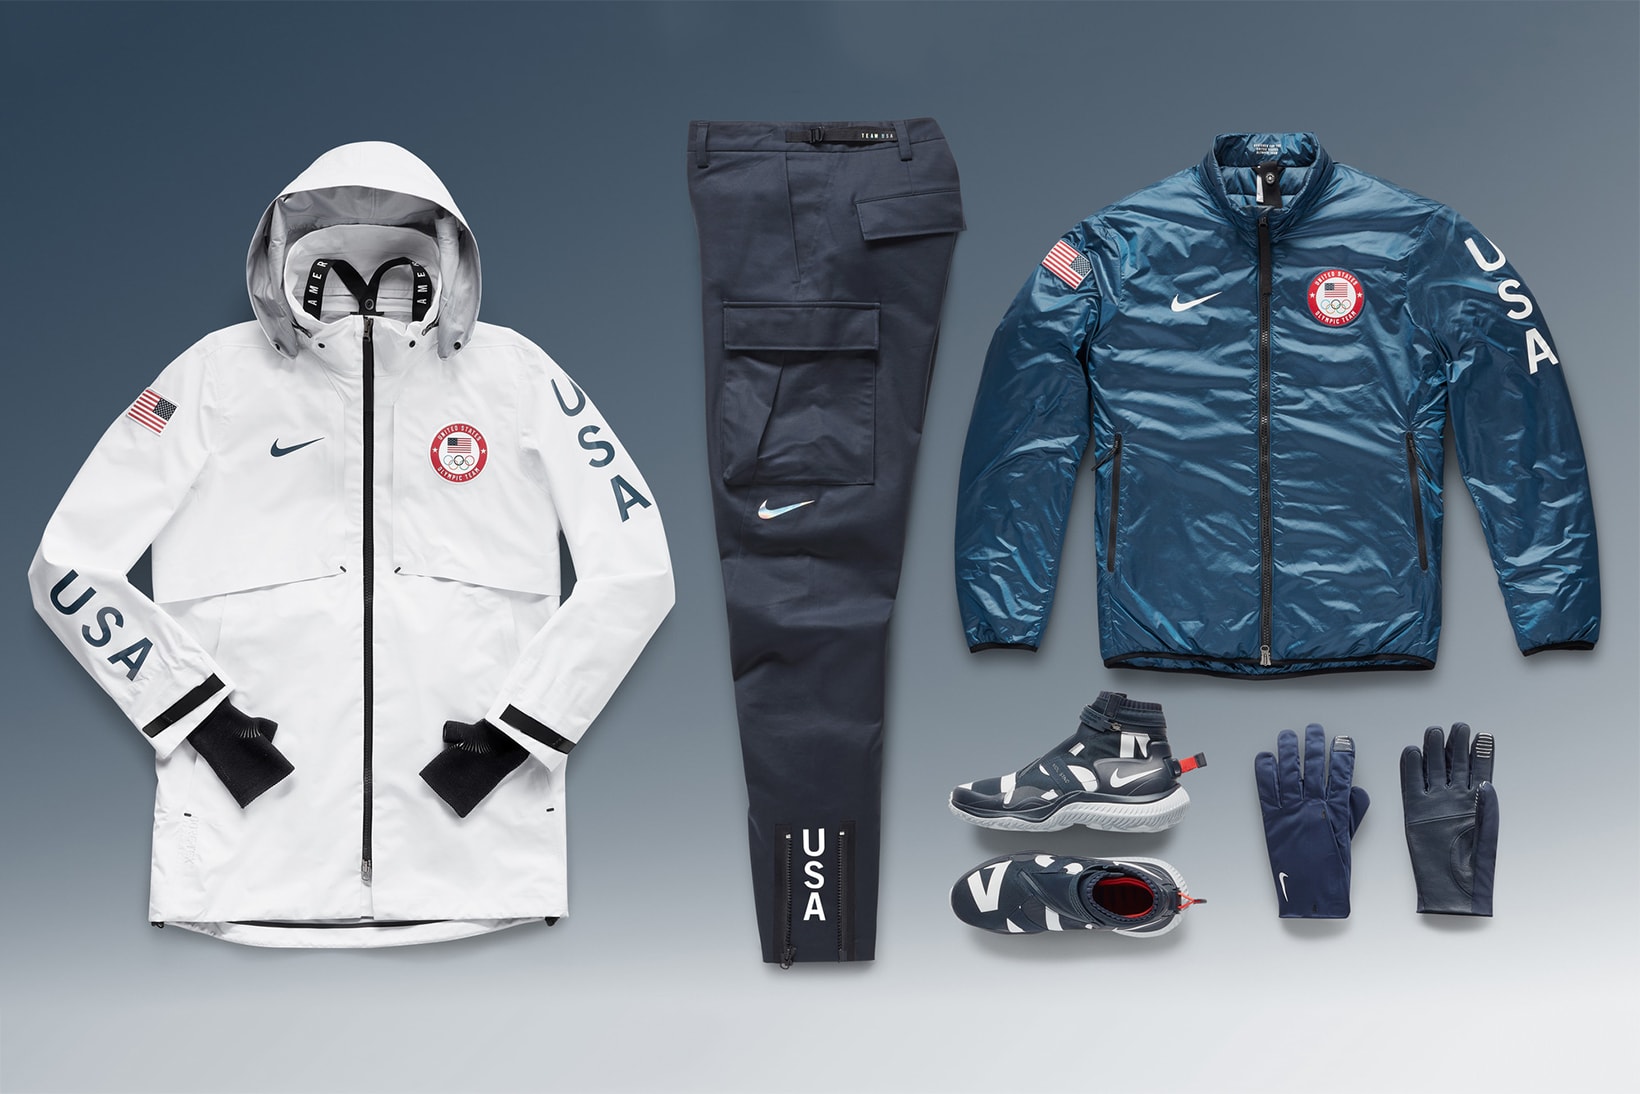 Nike Team USA Medal Stand Collection 2018 summit jacket system team usa pant nsw gaiter boot medal stand glove